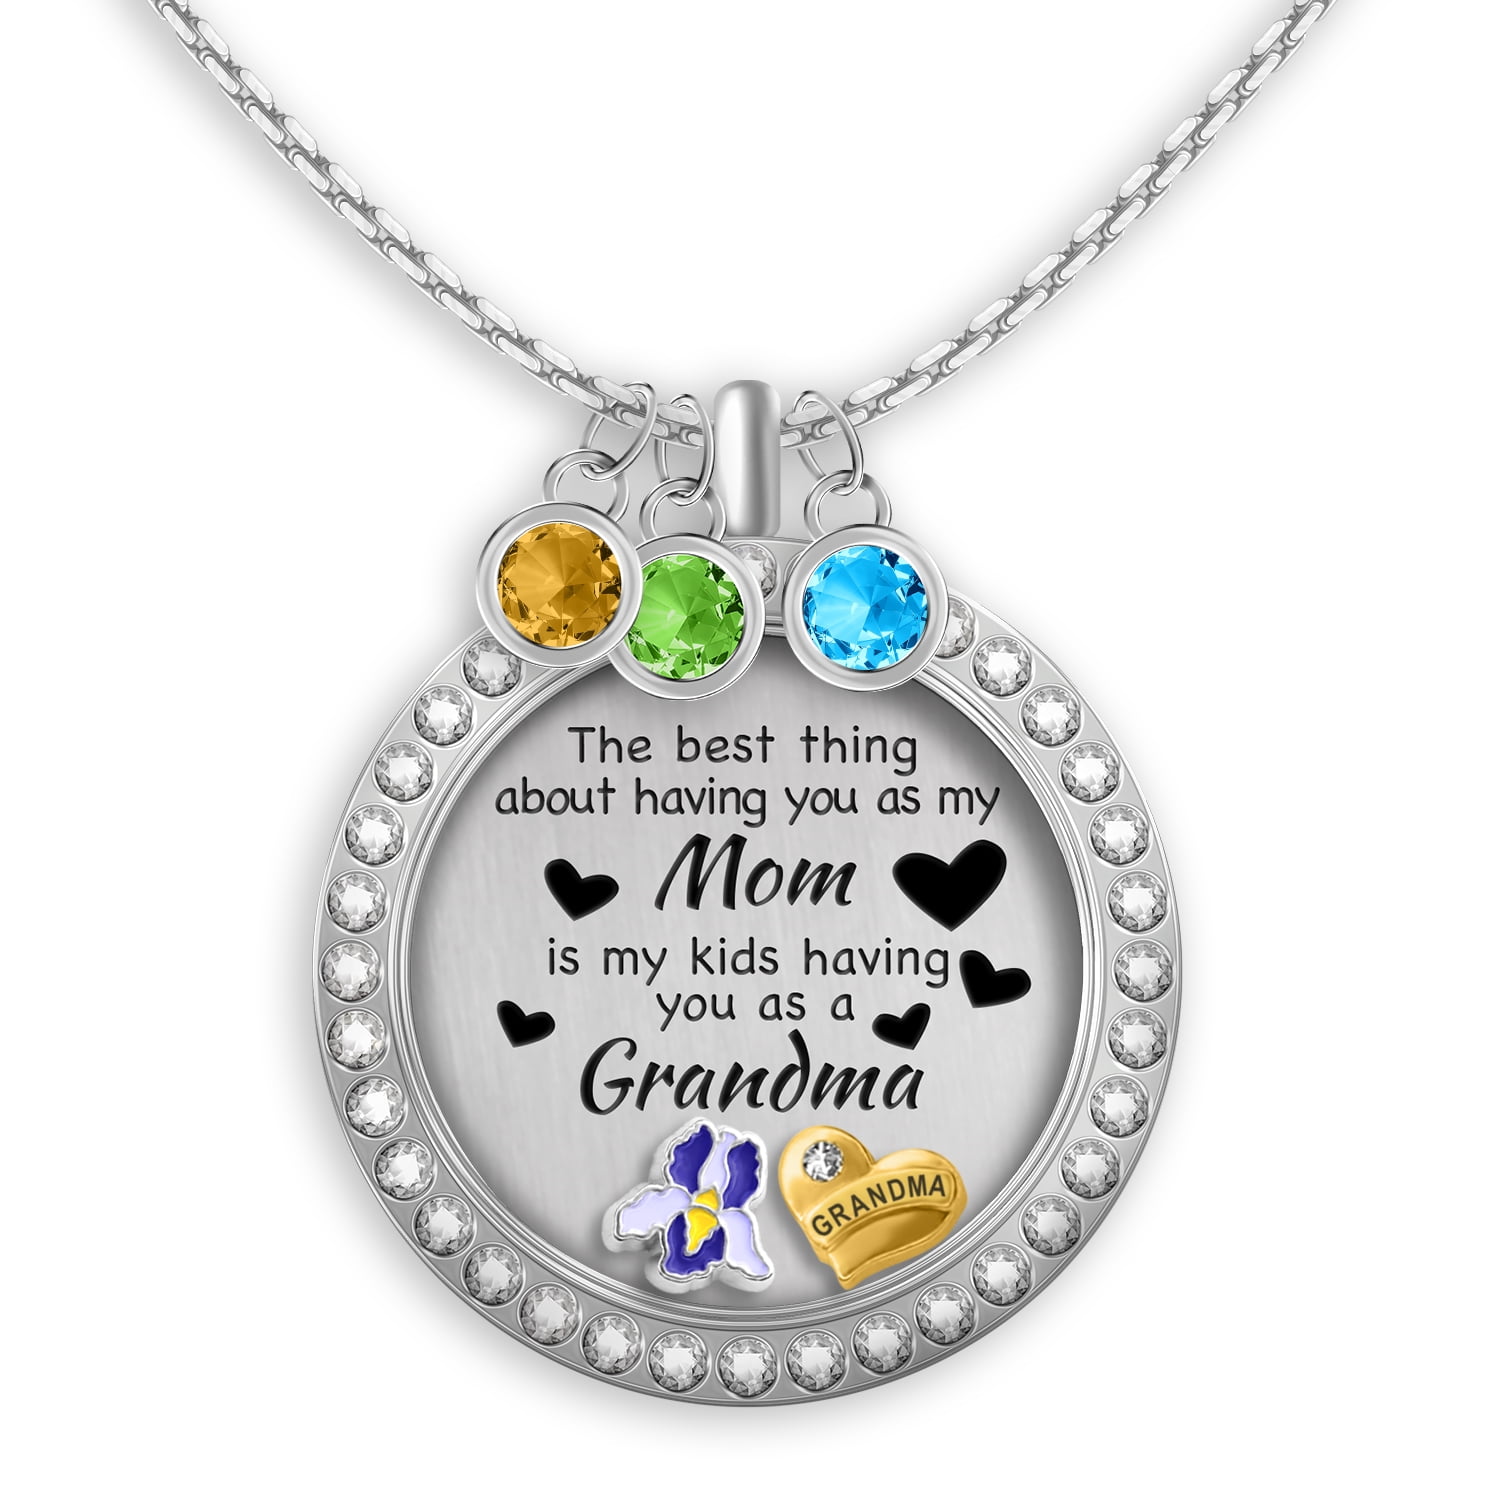 Football Floating Charm for Floating Locket Football Mom Football Player Football Game